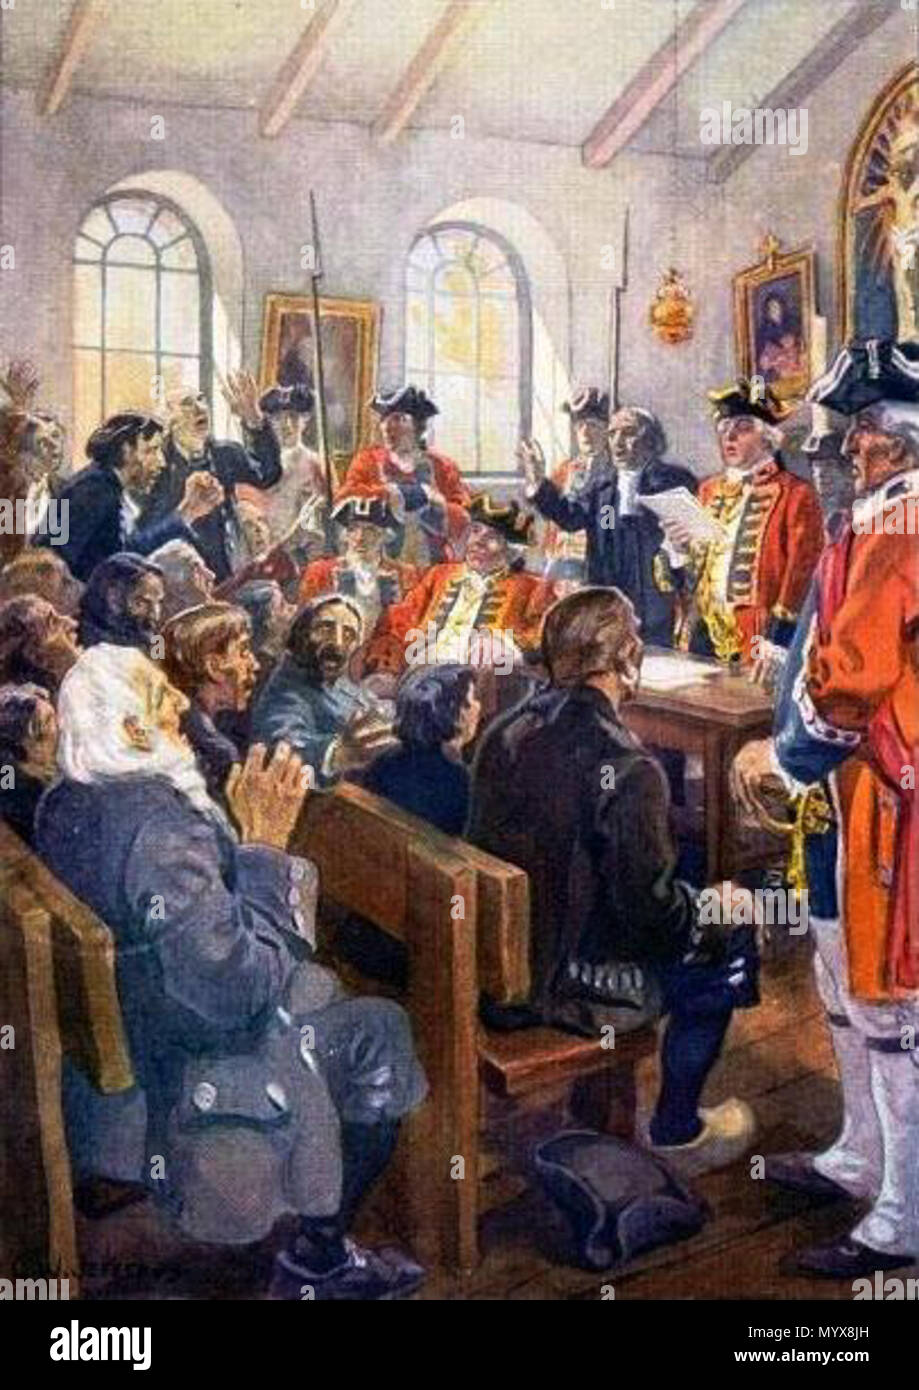 . Painting of the Acadian Expulsion order being read by colonel Winslow in the parish church of Grand-Pré, Nova Scotia, Canada, 1755.  . Reading the Order of expulsion to the Acadians in the parish Church at Grand-Pré, in 1755 . 1923 1 Deportation of Acadians order, painting by Jefferys Stock Photo